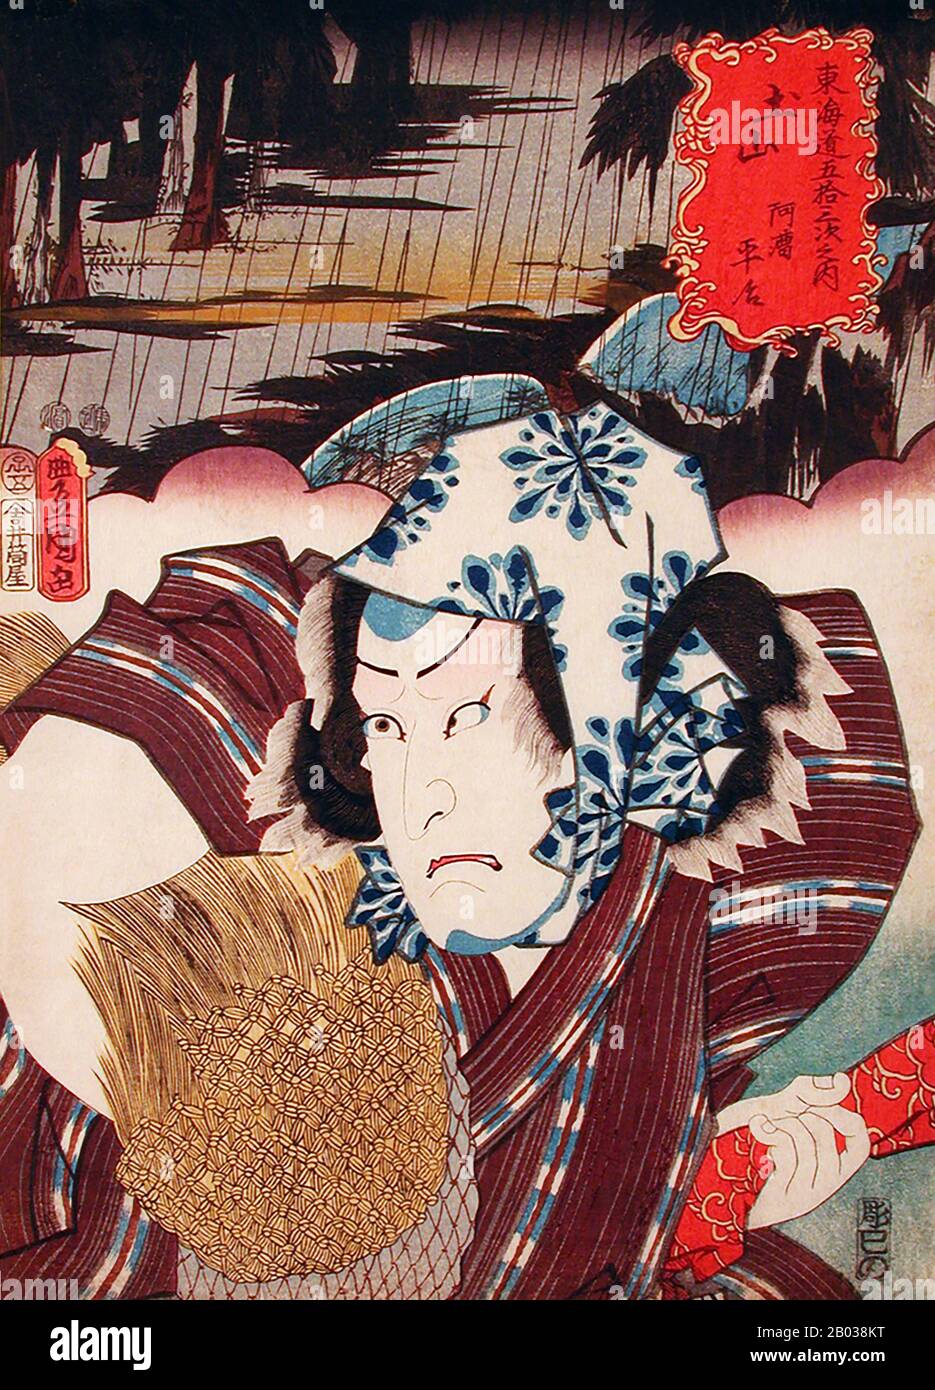 Utagawa Kunisada (1786-1865), also known as Utagawa Toyokuni III, was the most popular and prolific designer of Ukiyo-e woodblock prints in 19th-century Japan. His reputation and financial success far exceeded those of his contemporaries.  Surprisingly, not many details of Kunisada's life are recorded, aside from a few well-established events. He was born in 1786 in Honjo, a district of Edo (now Tokyo), with the given name Sumida Shogoro IX. His family owned a fairly successful ferry-boat service, and he soon developed an artistic talent as he grew up. So impressive were his early sketches tha Stock Photo